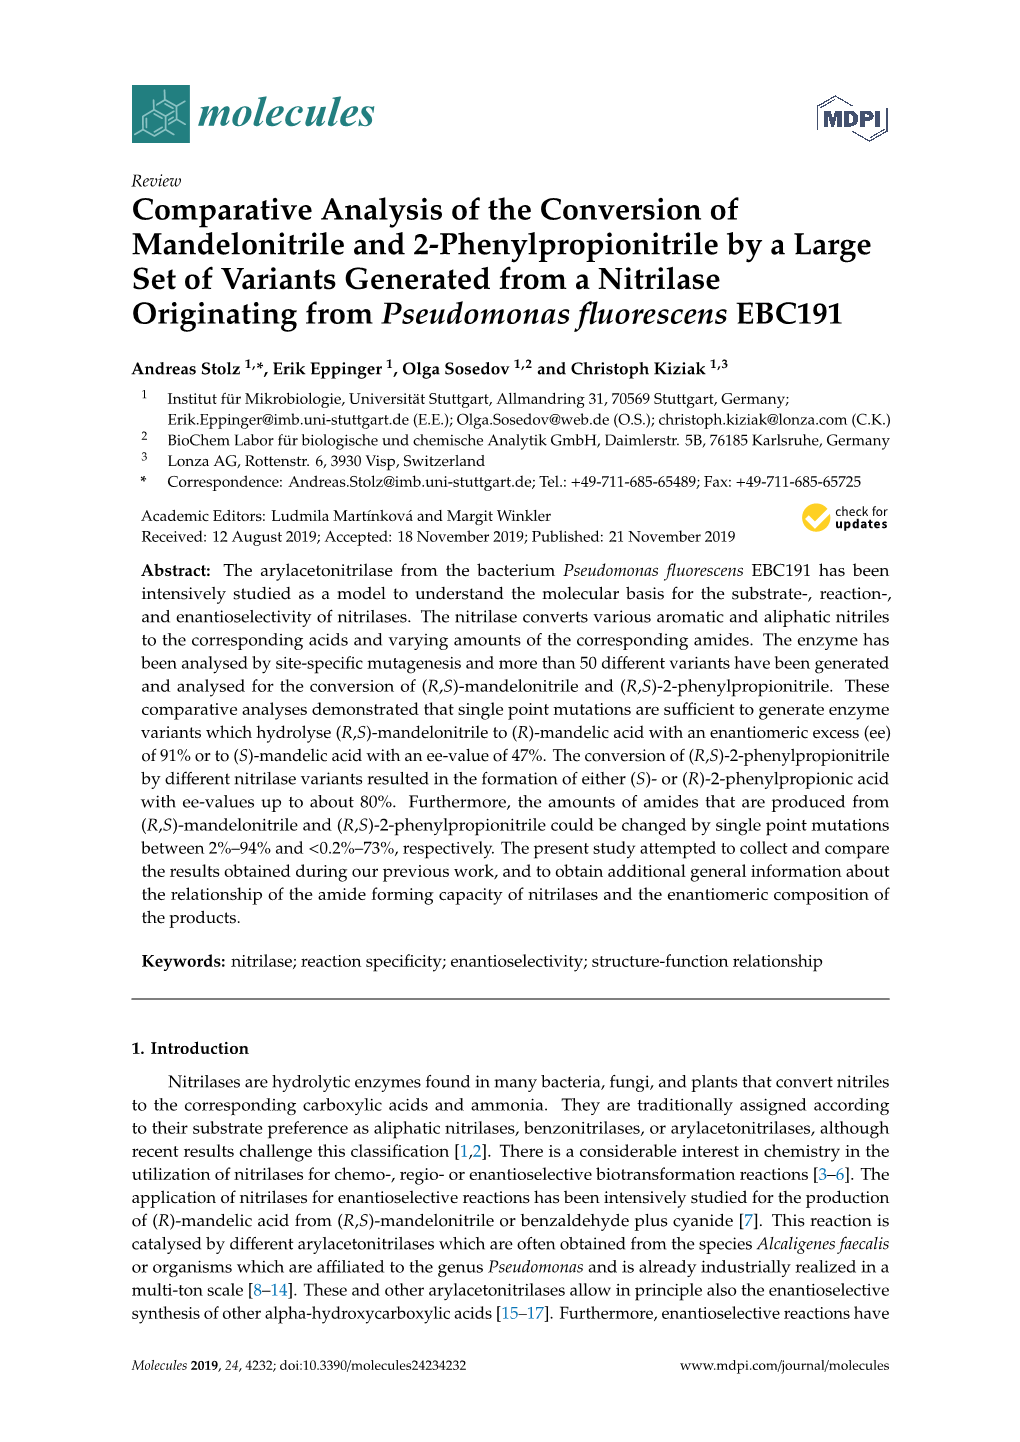 Comparative Analysis of the Conversion of Mandelonitrile and 2